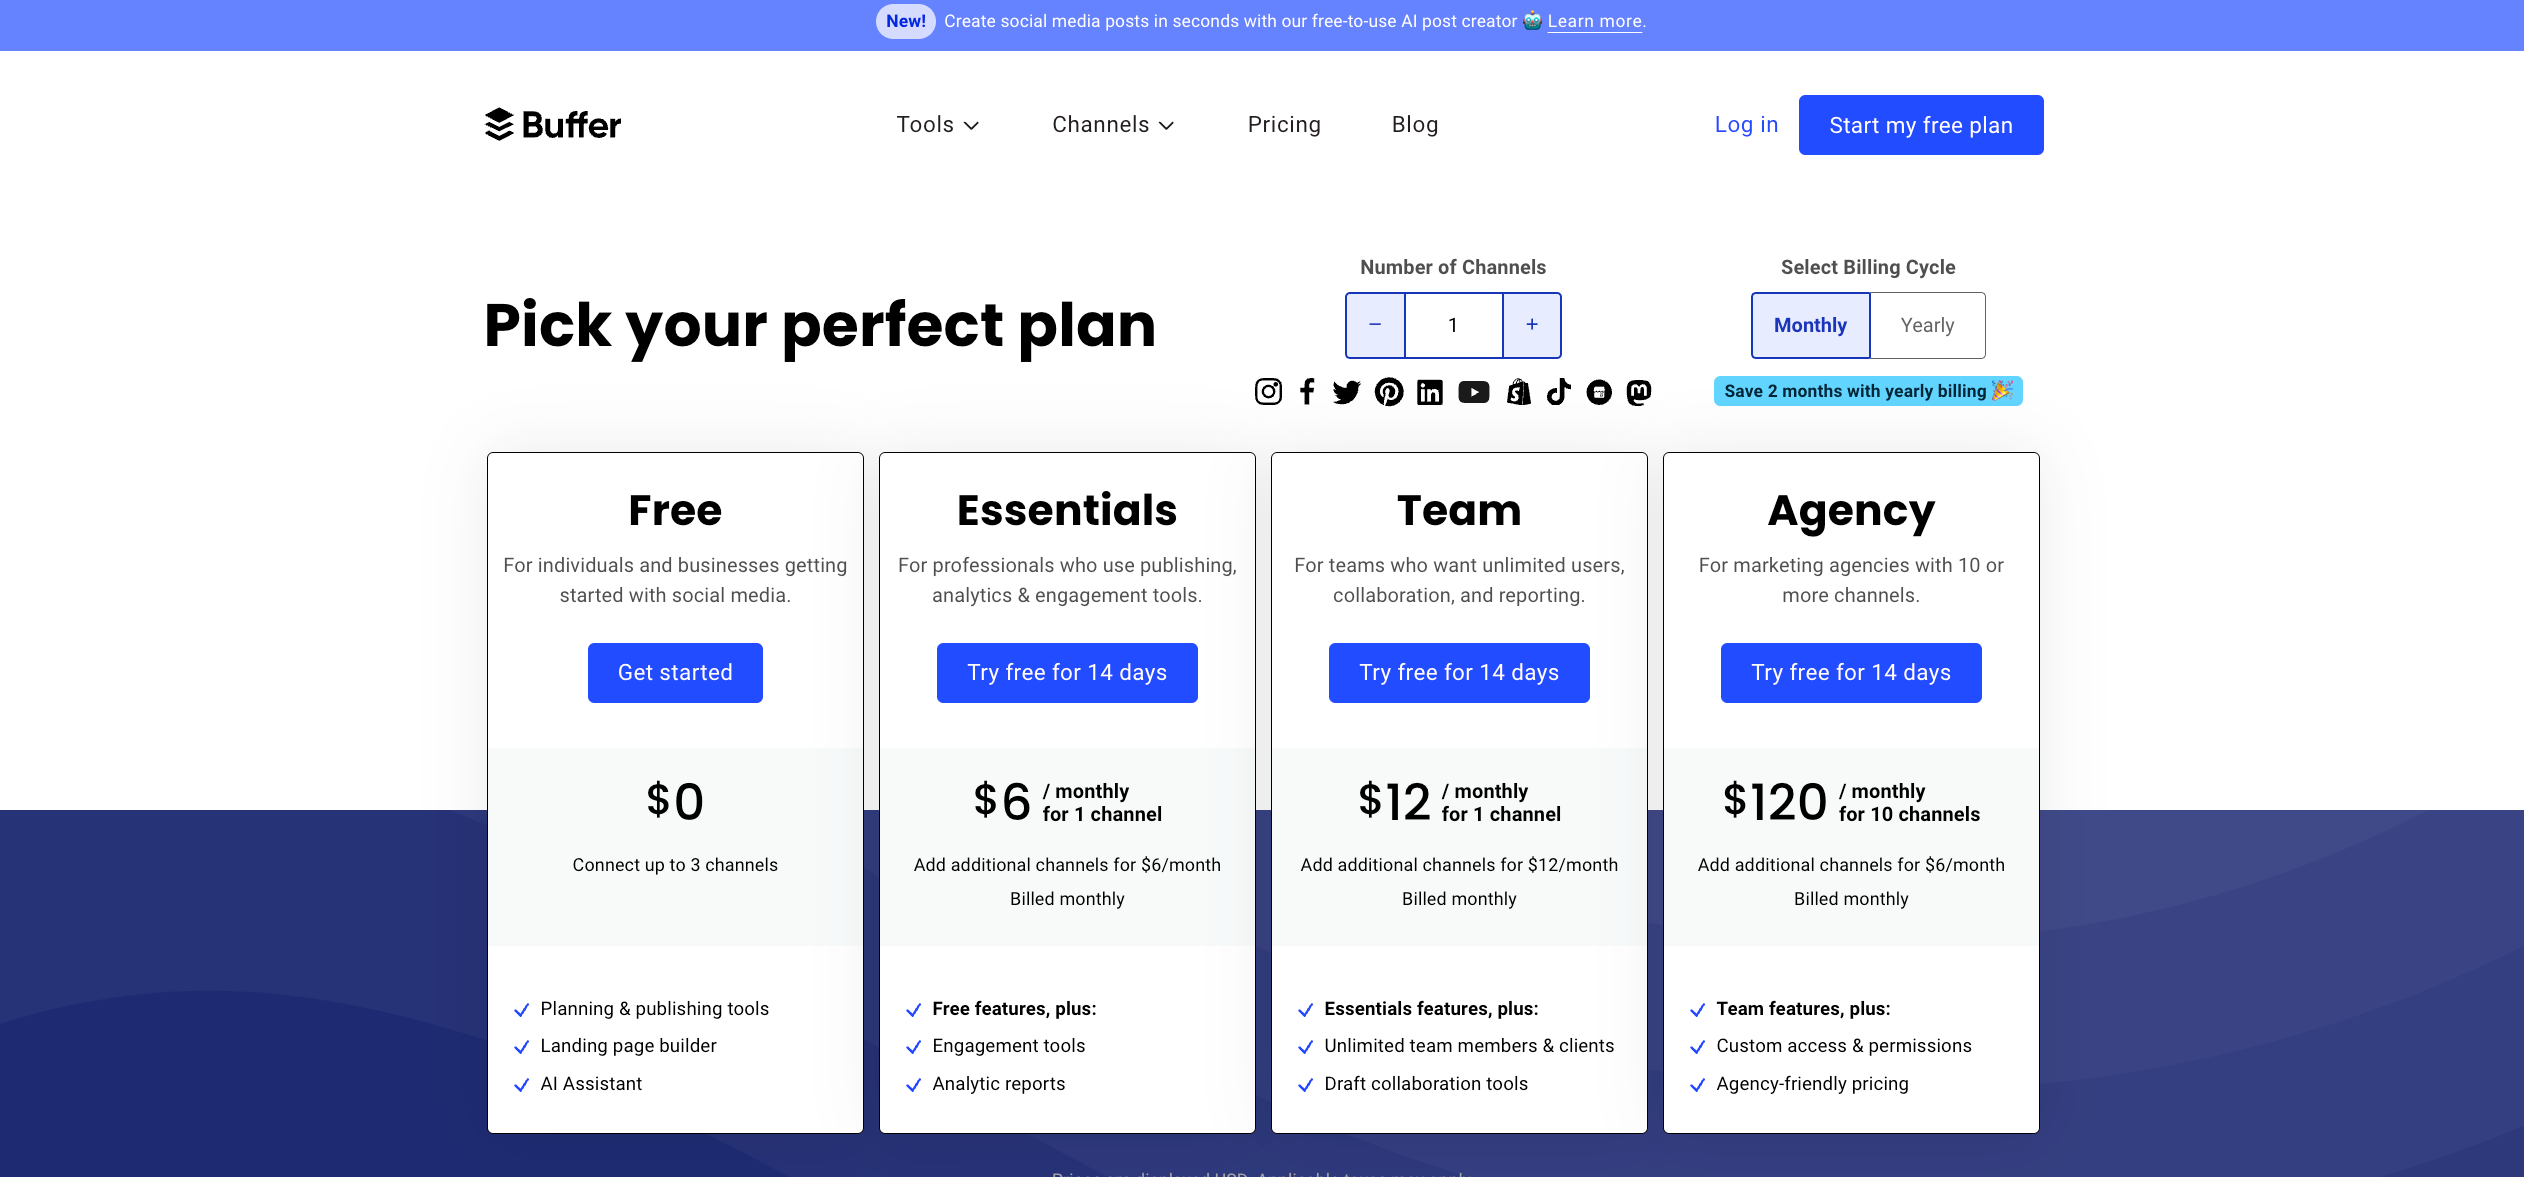 Buffer's pricing plans